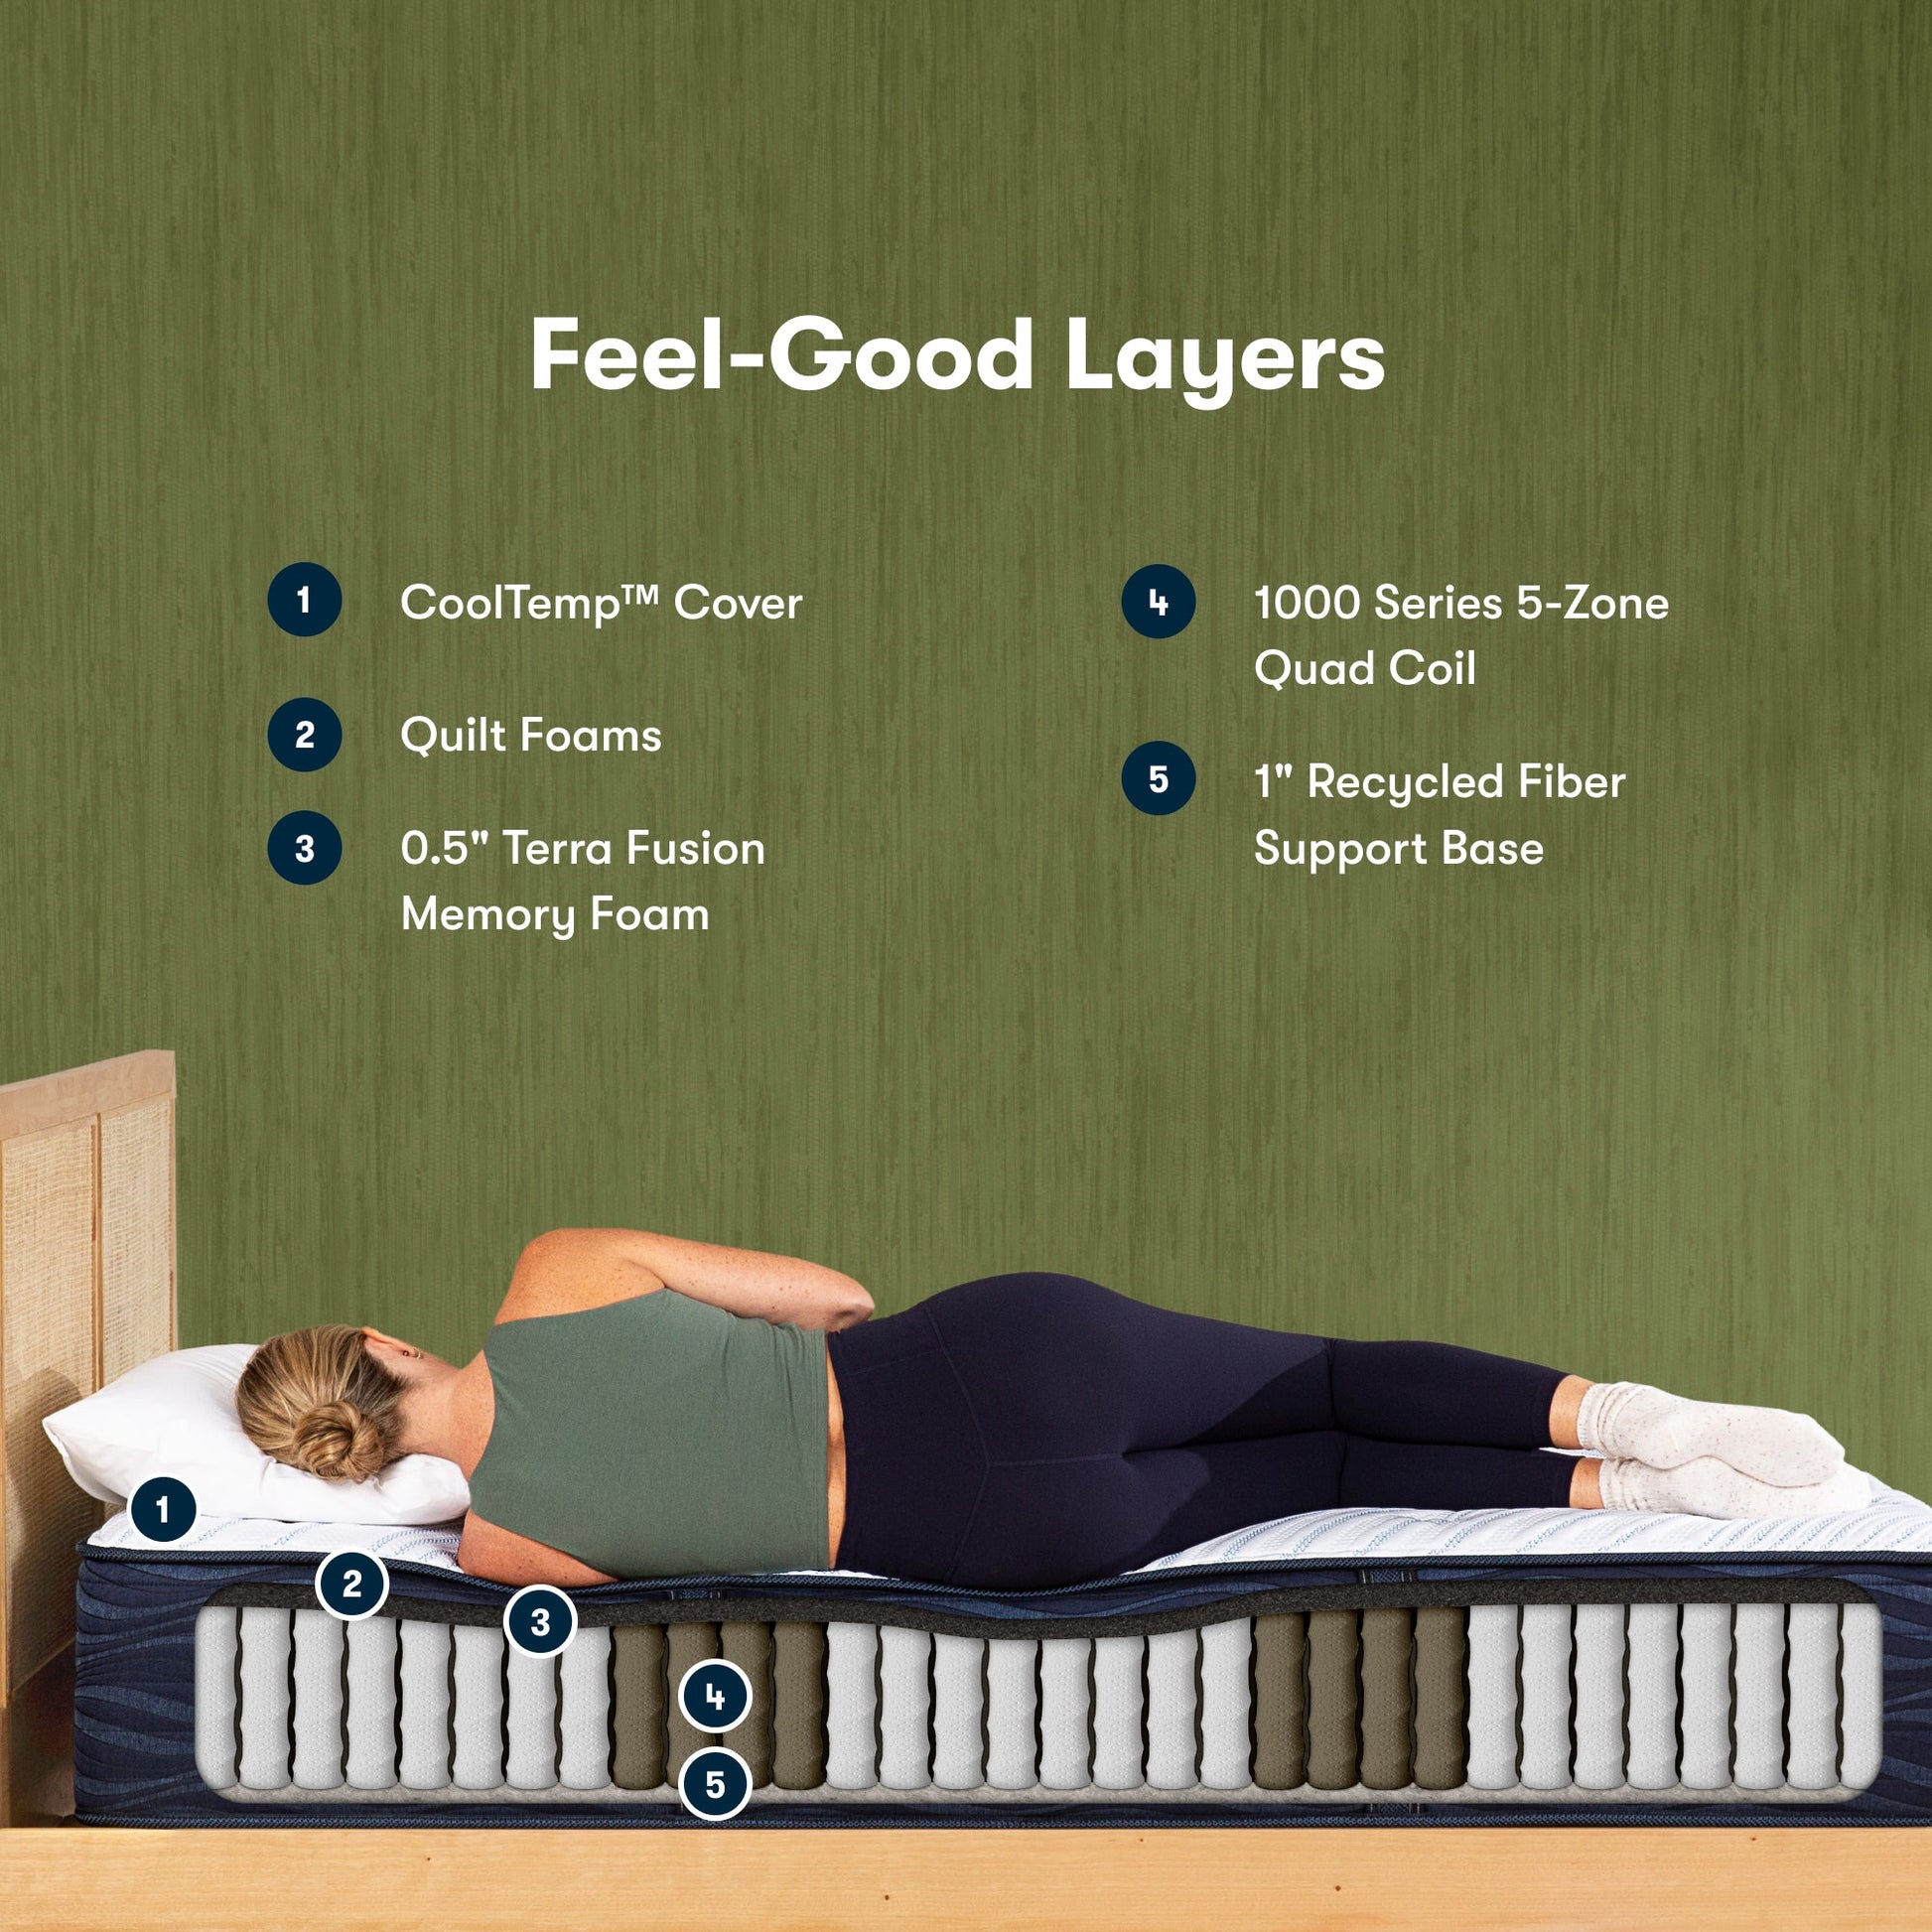 Serta iComfortECO Quilted Hybrid Extra Firm Mattress Feel-Good Layers